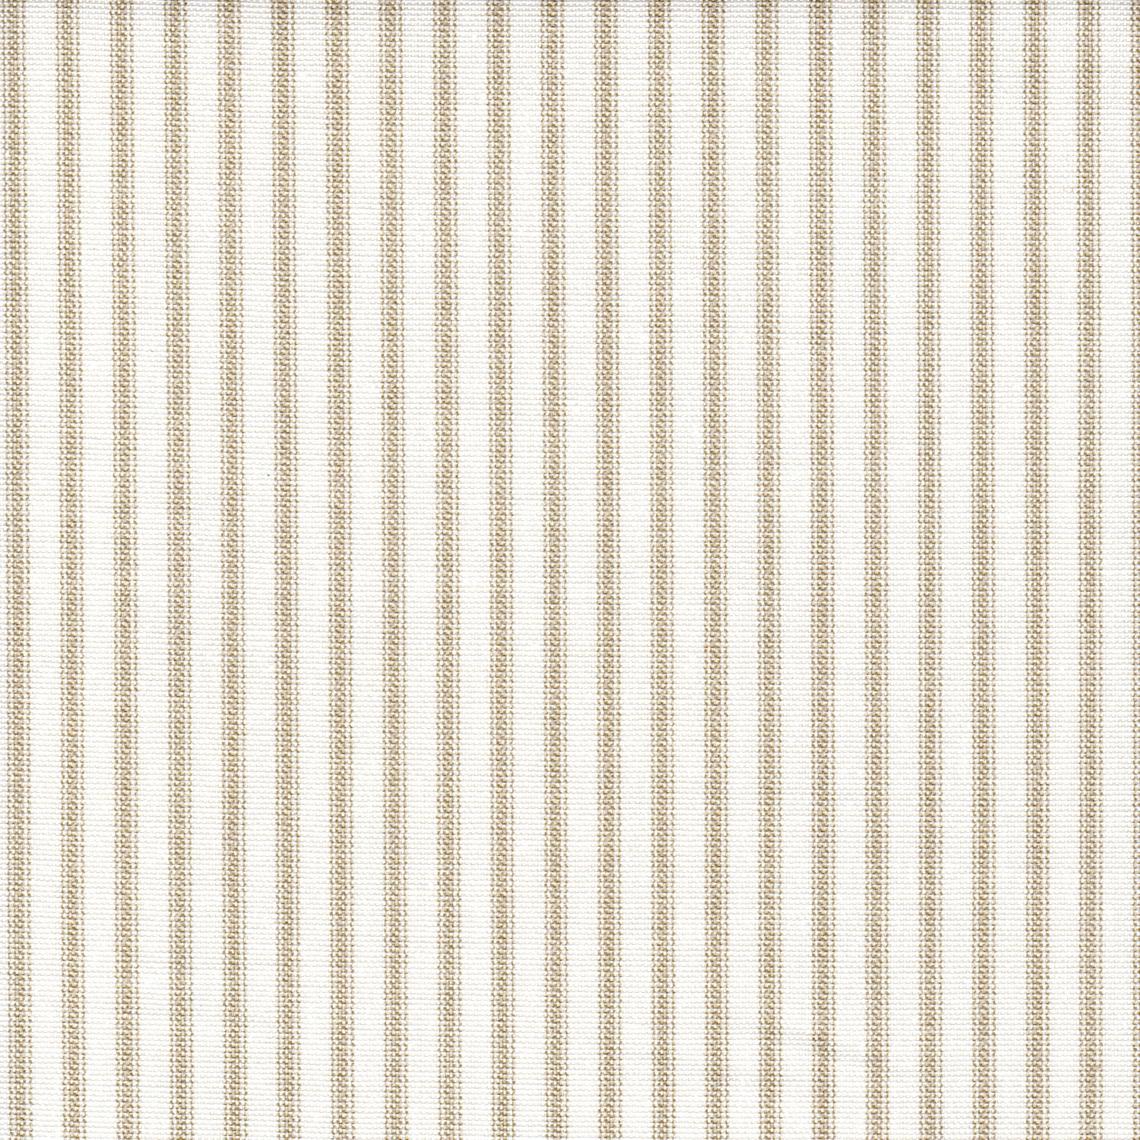 scallop valance in farmhouse sand beige traditional ticking stripe